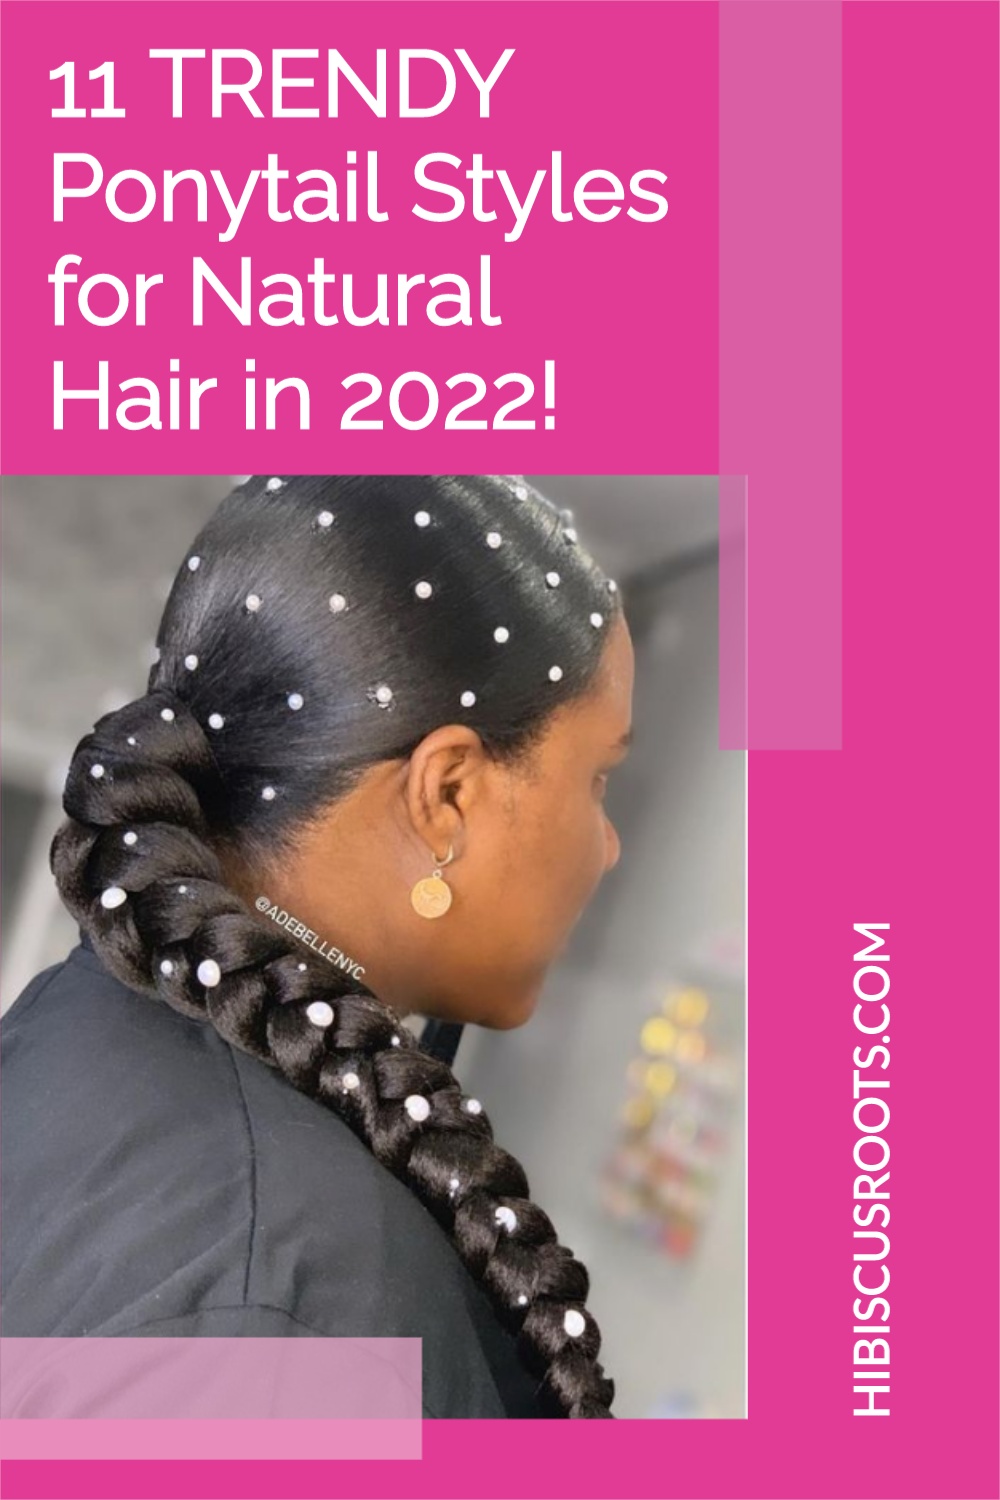 11 Trendy Natural Hair Ponytail Styles for 2022!